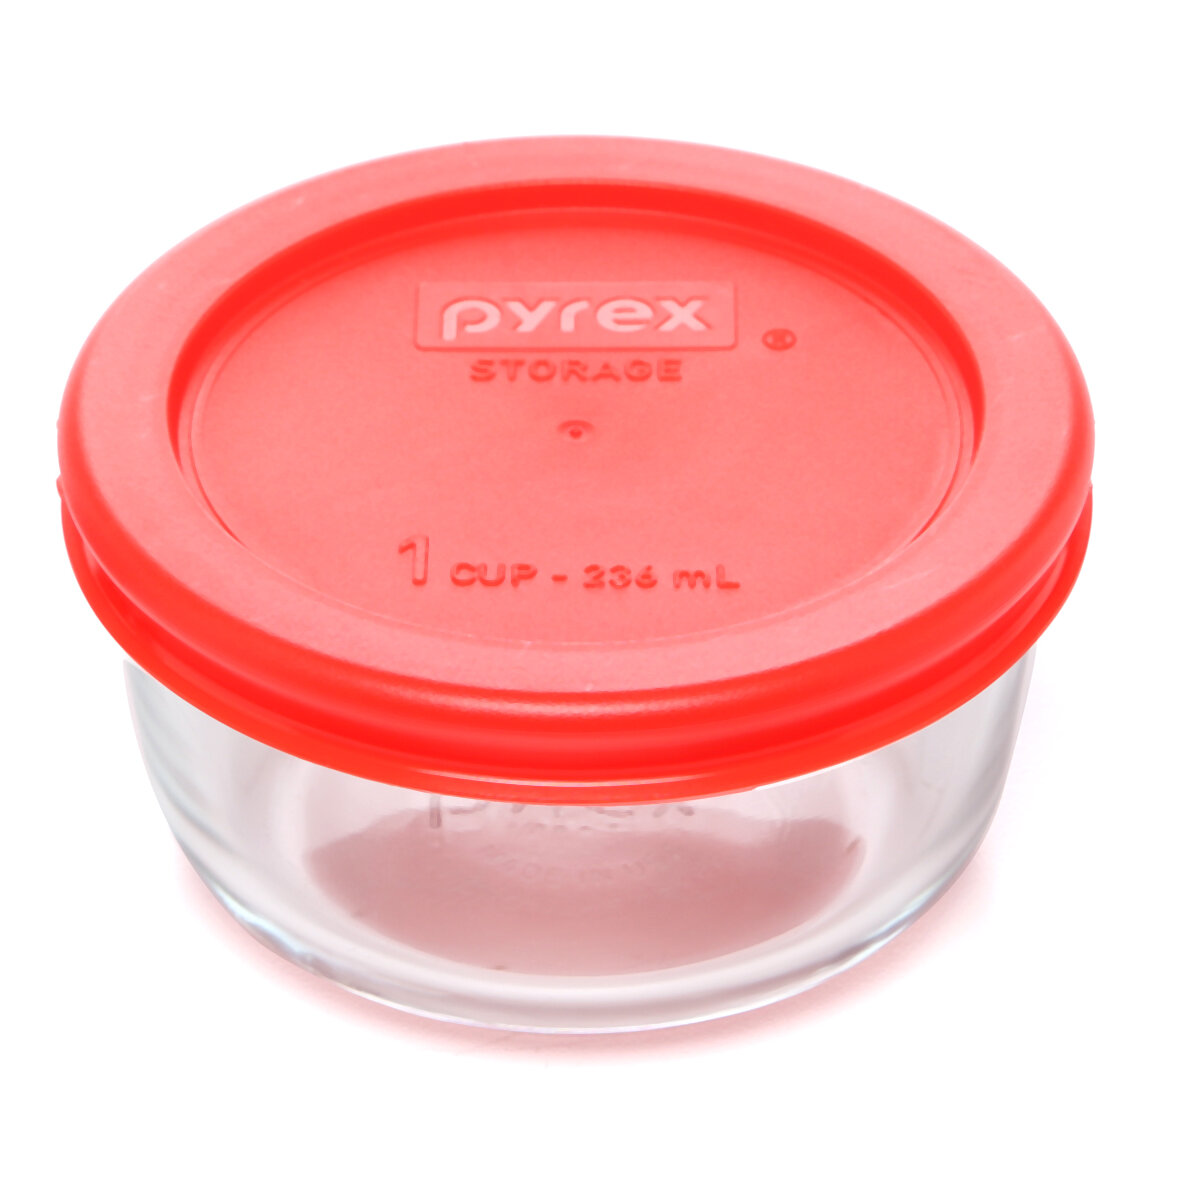 Pyrex 1 Cup Food Storage Container & Reviews